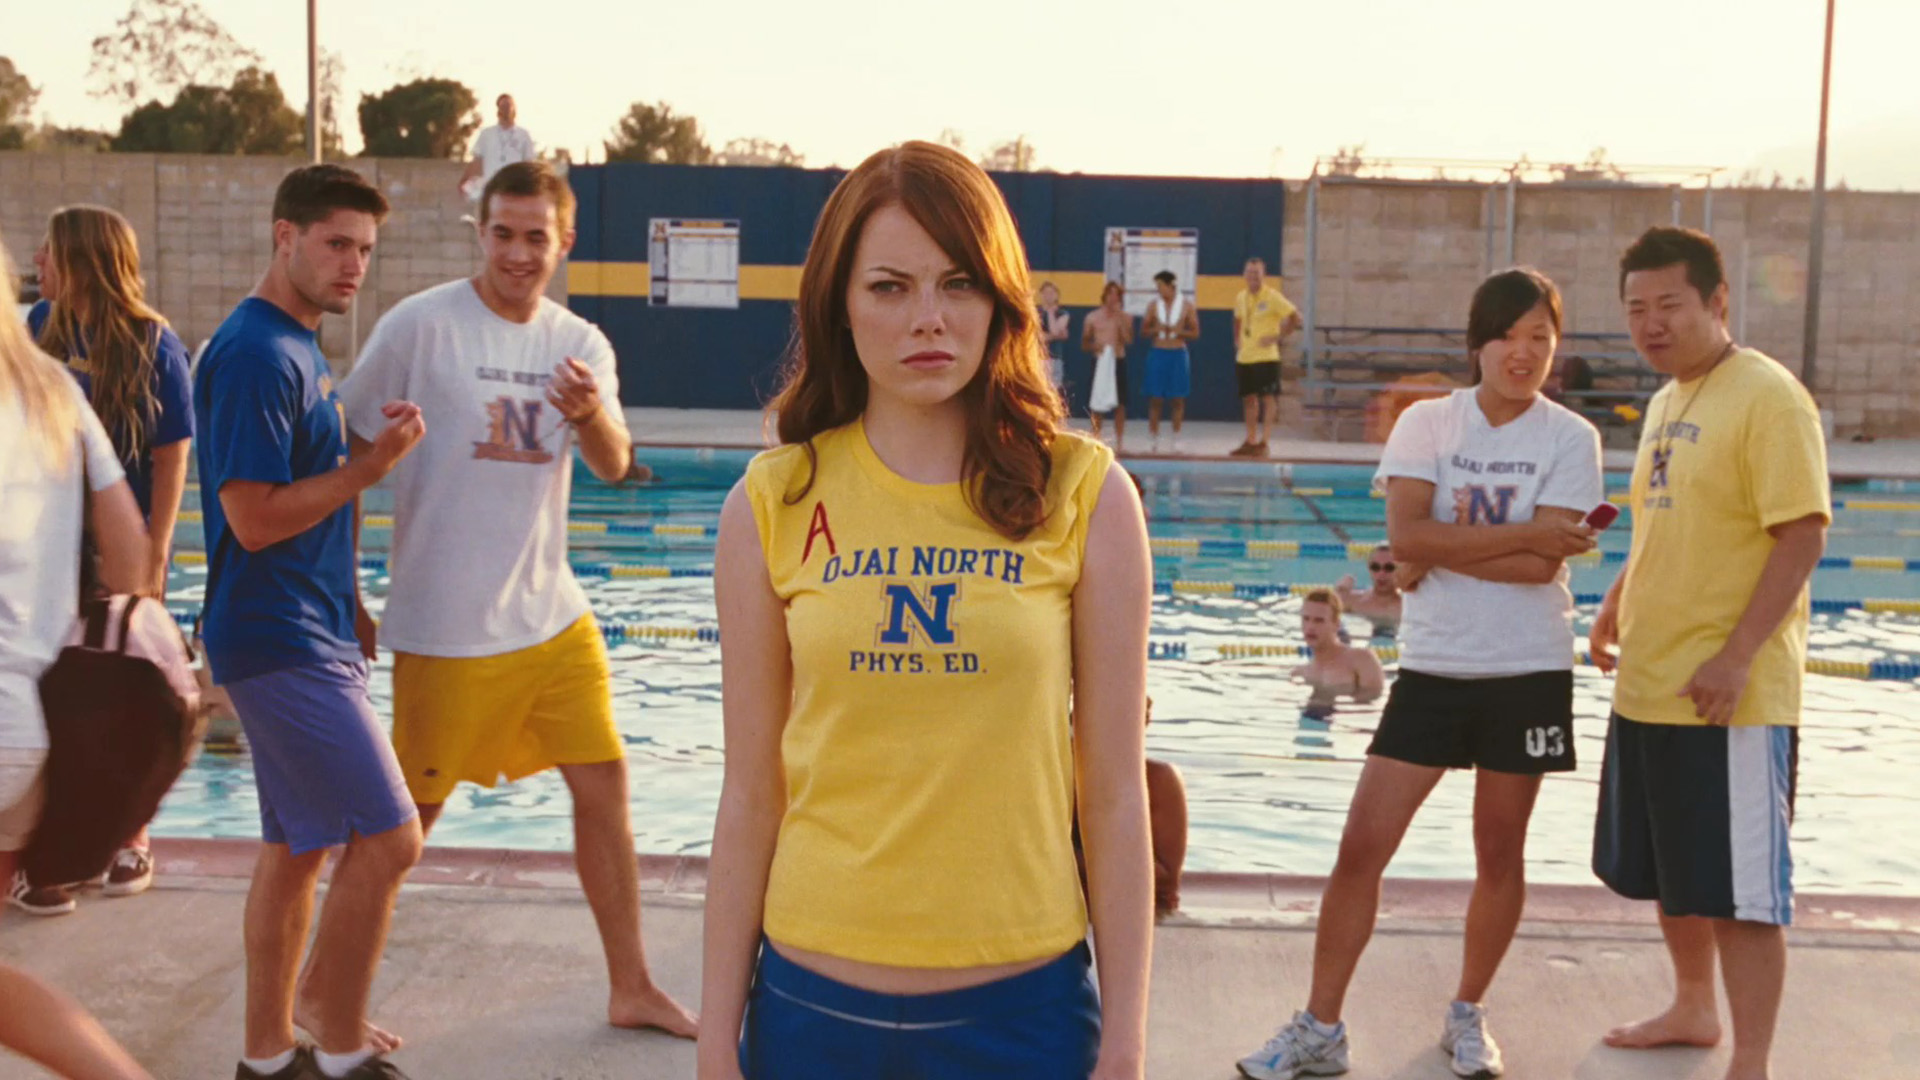 Easy A #1